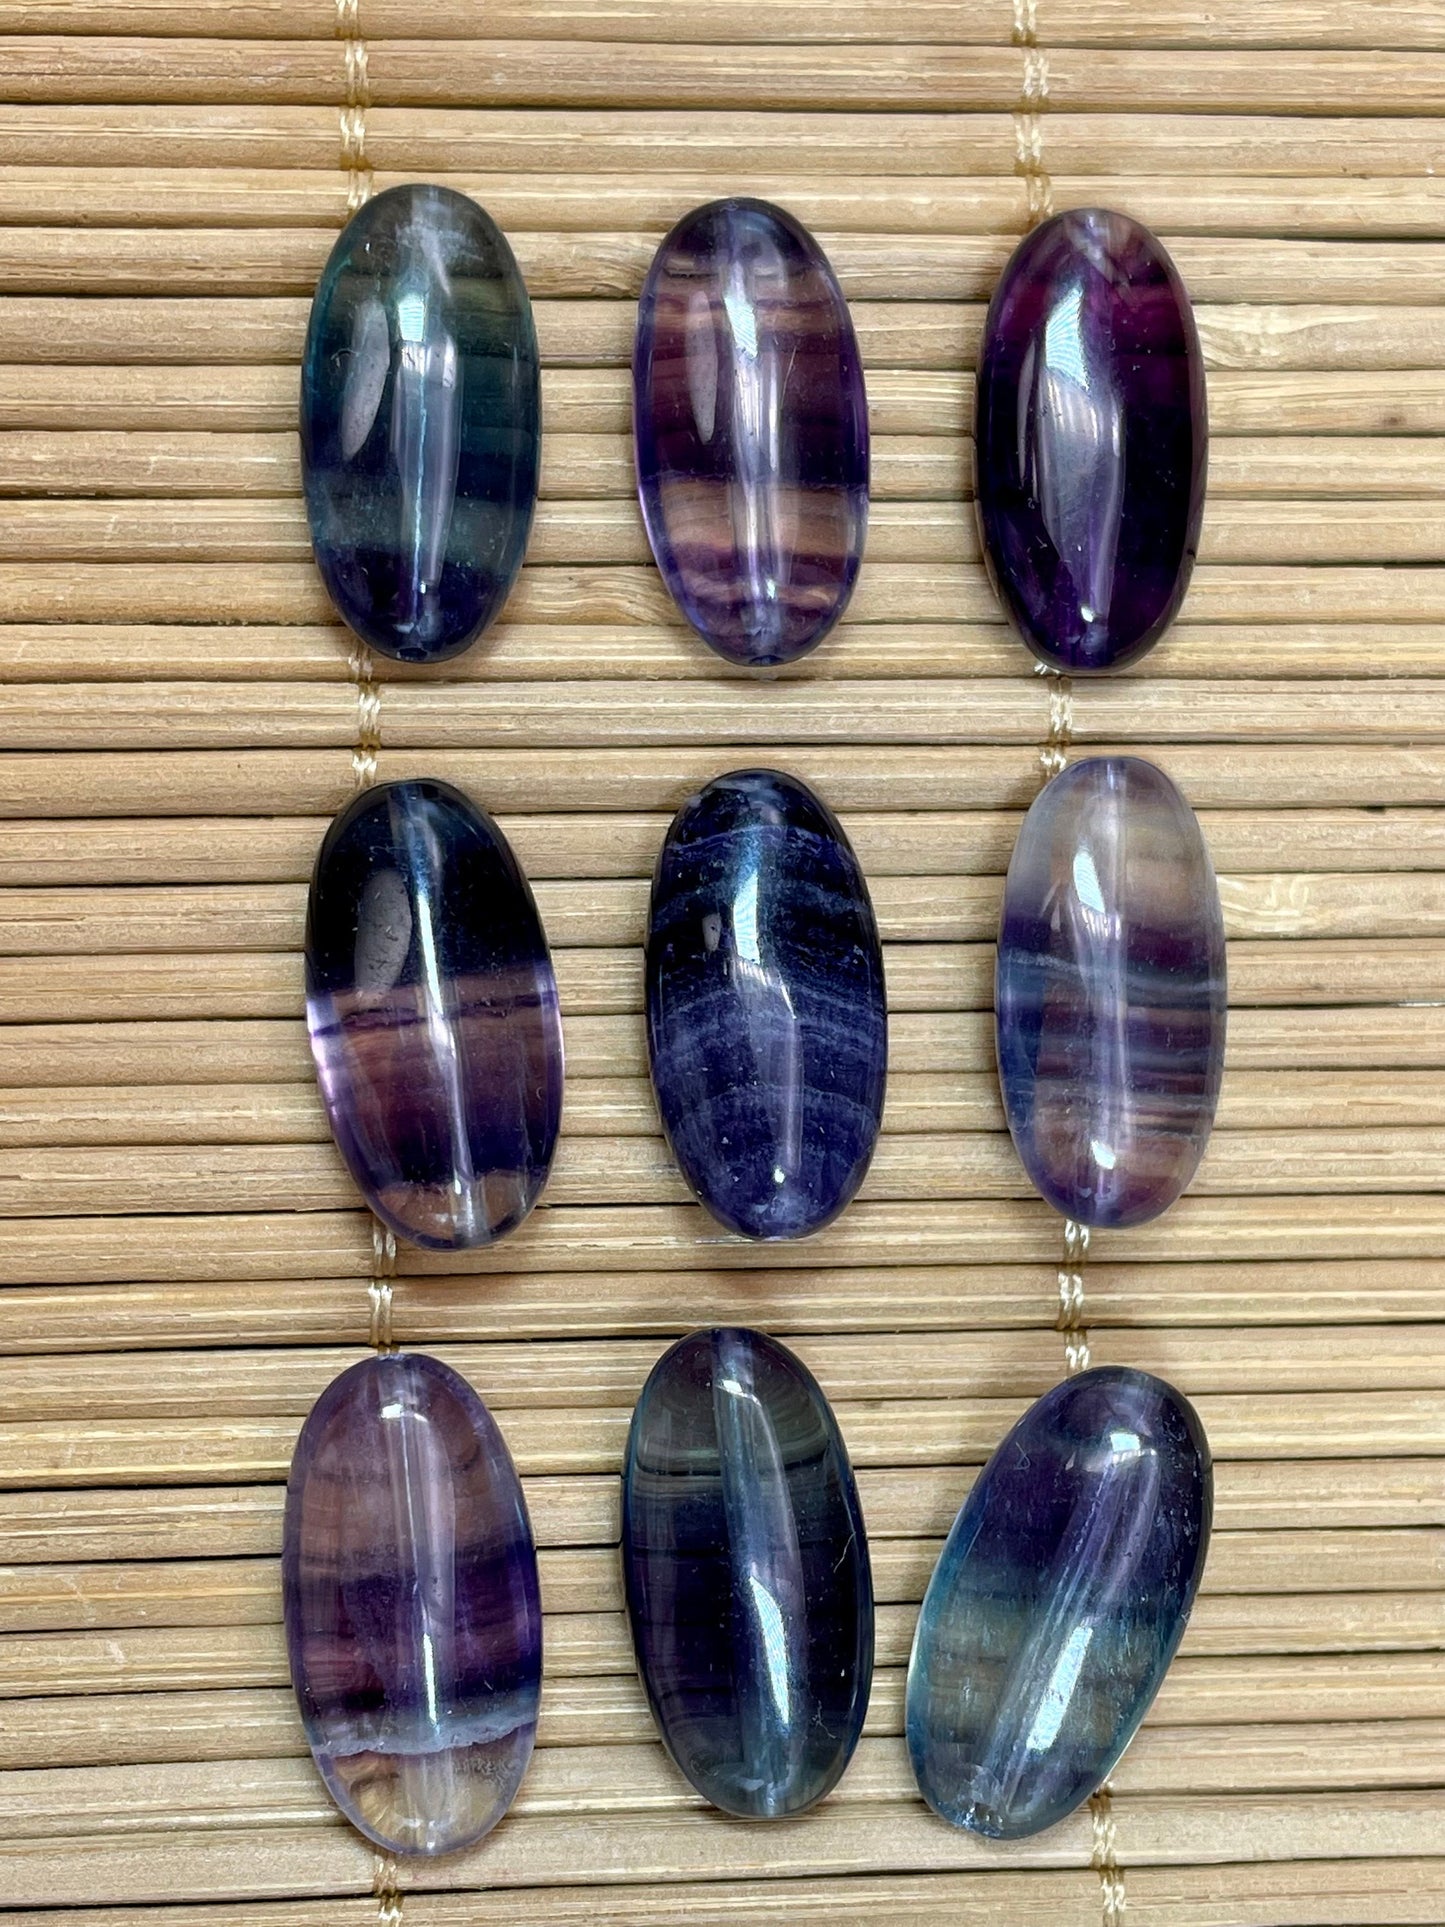 AAA Natural Fluorite Gemstone Bead 20x10mm Smooth Oval Shape, Gorgeous Natural Purple Green Color Fluorite Bead, LOOSE BEADS